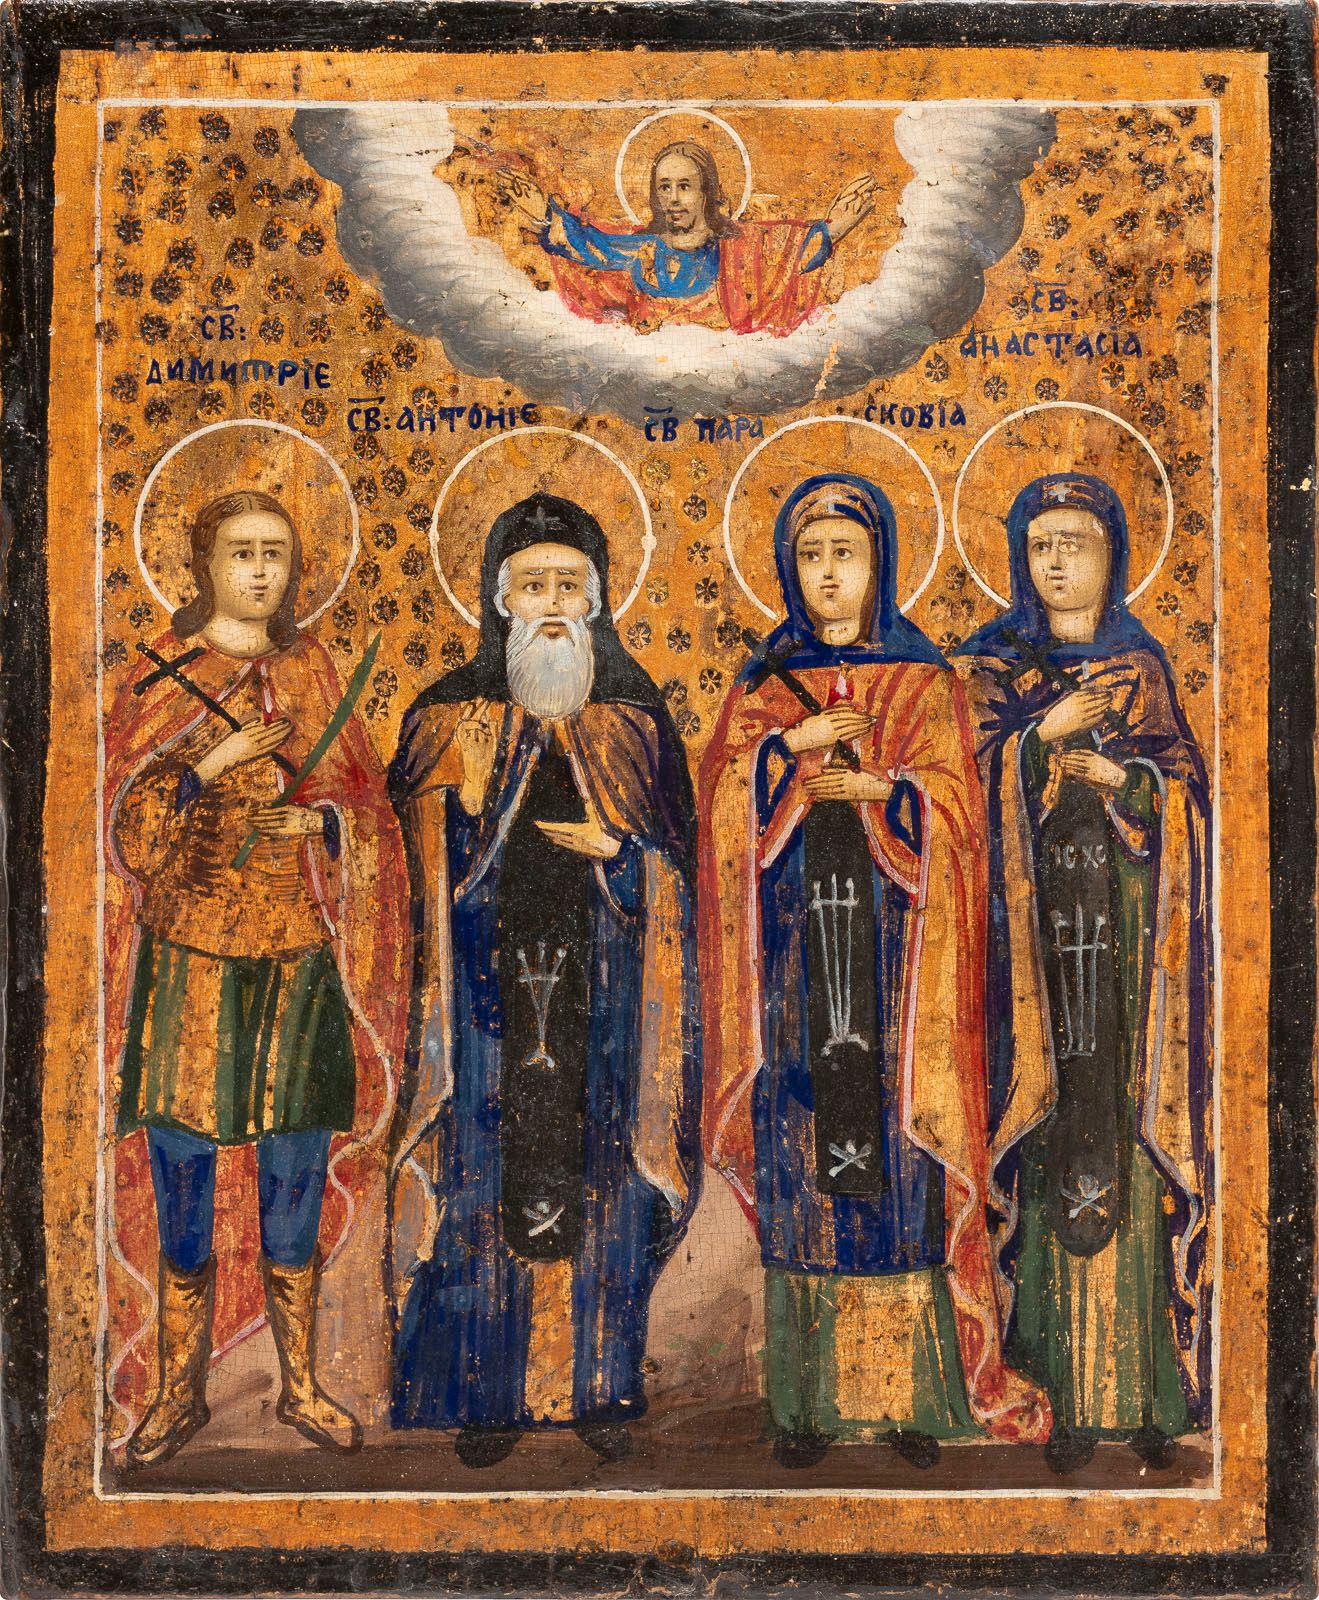 AN ICON SHOWING STS. DEMETRIUS, ANTHONY, PARASKEVE AND ANAS IKONE MIT DEN HEILIG&hellip;